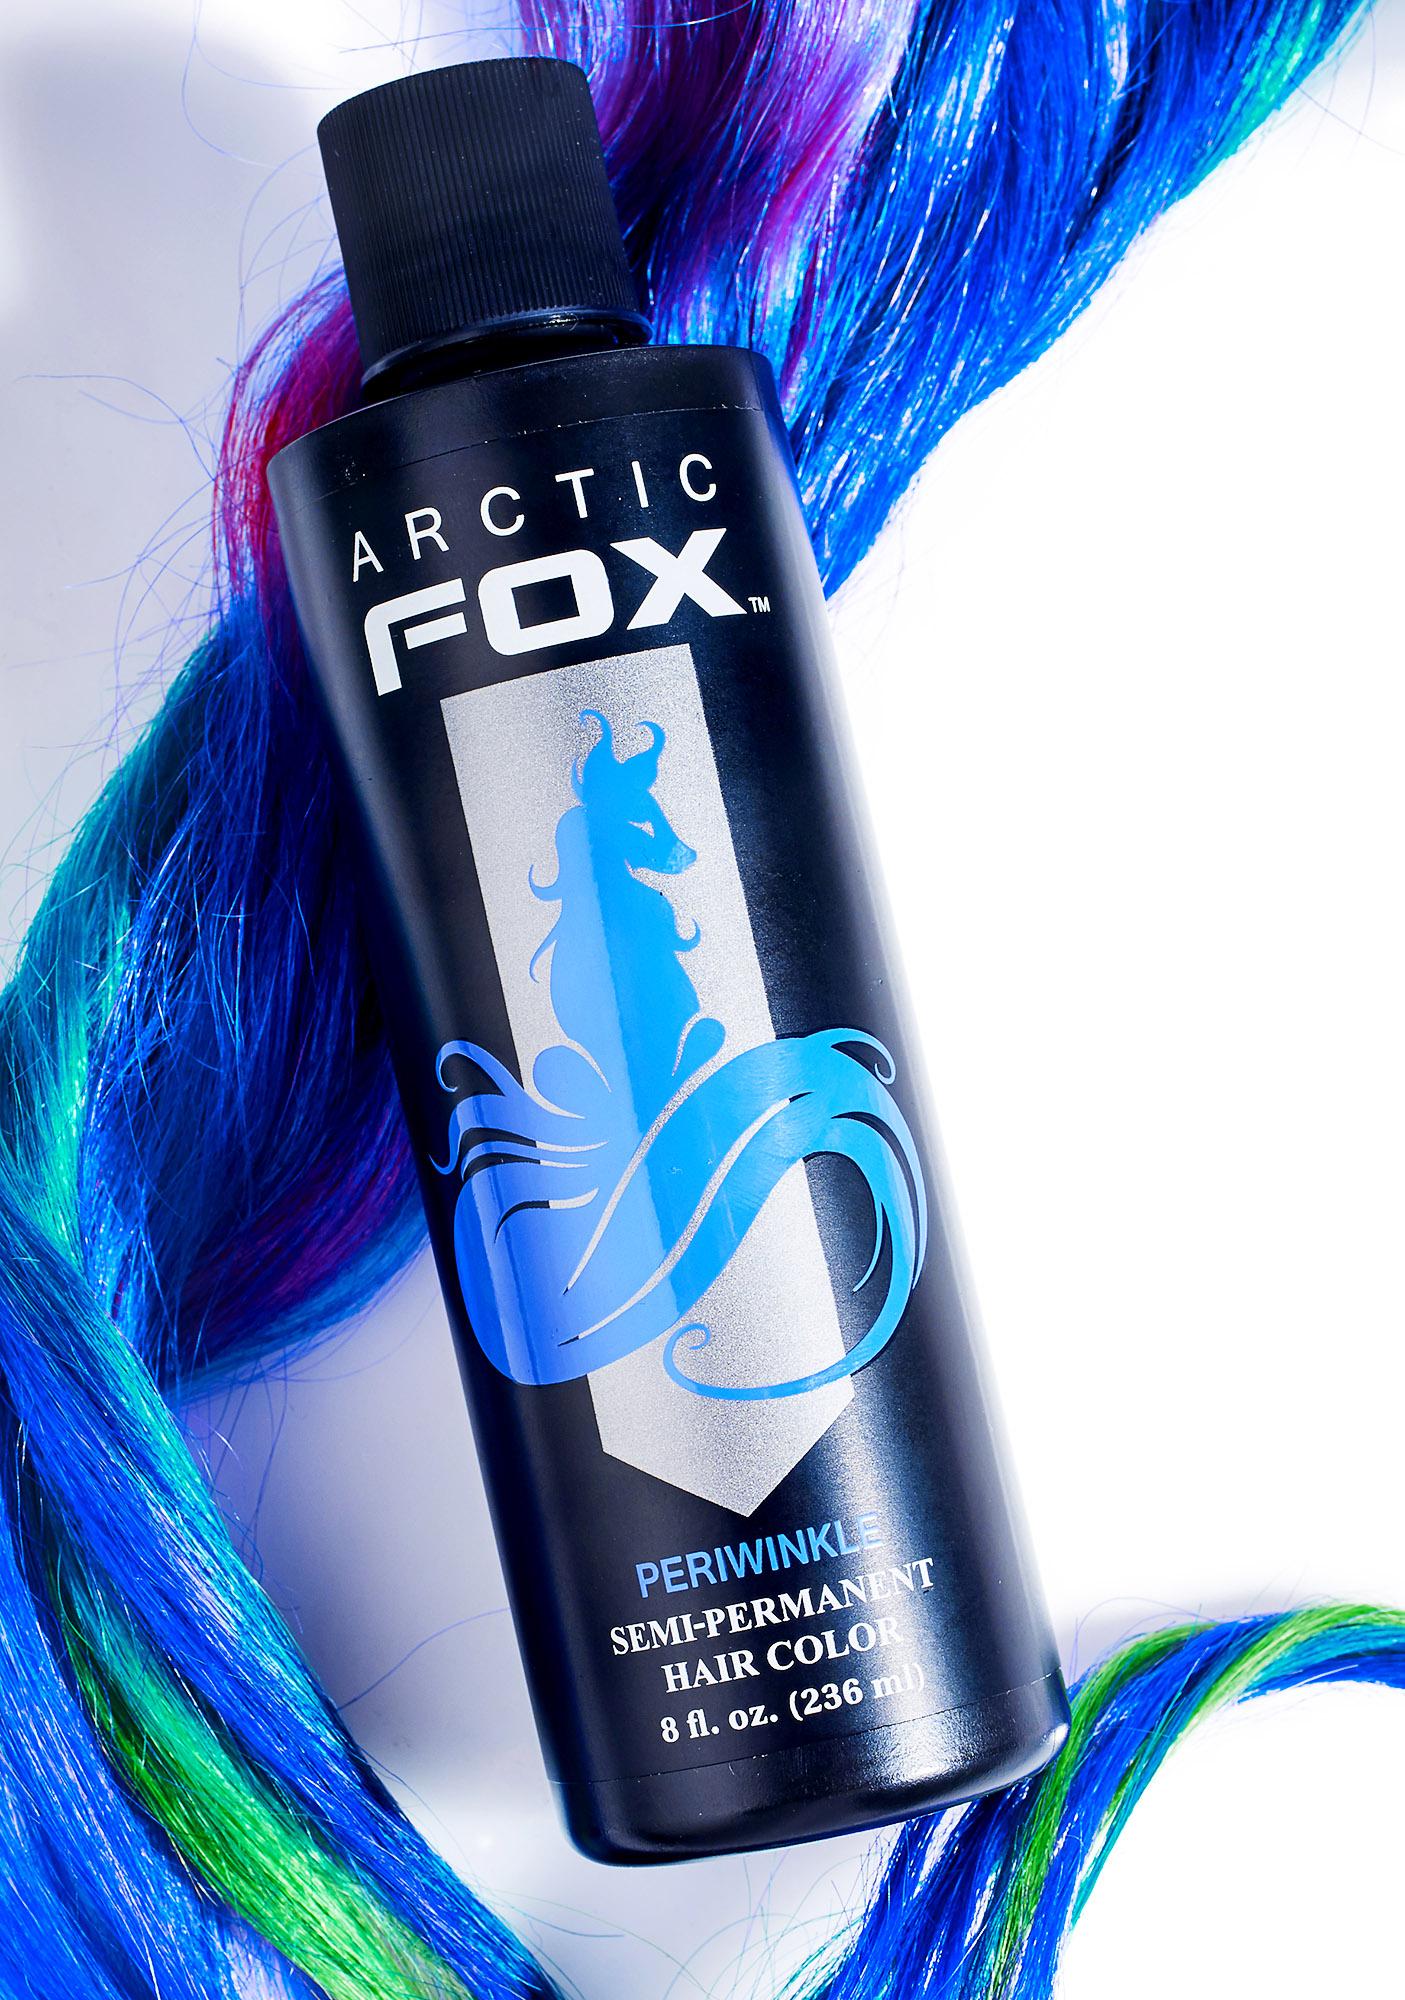 Arctic fox semi permanent hair dye contains no drying alcohols, ppds, or .....